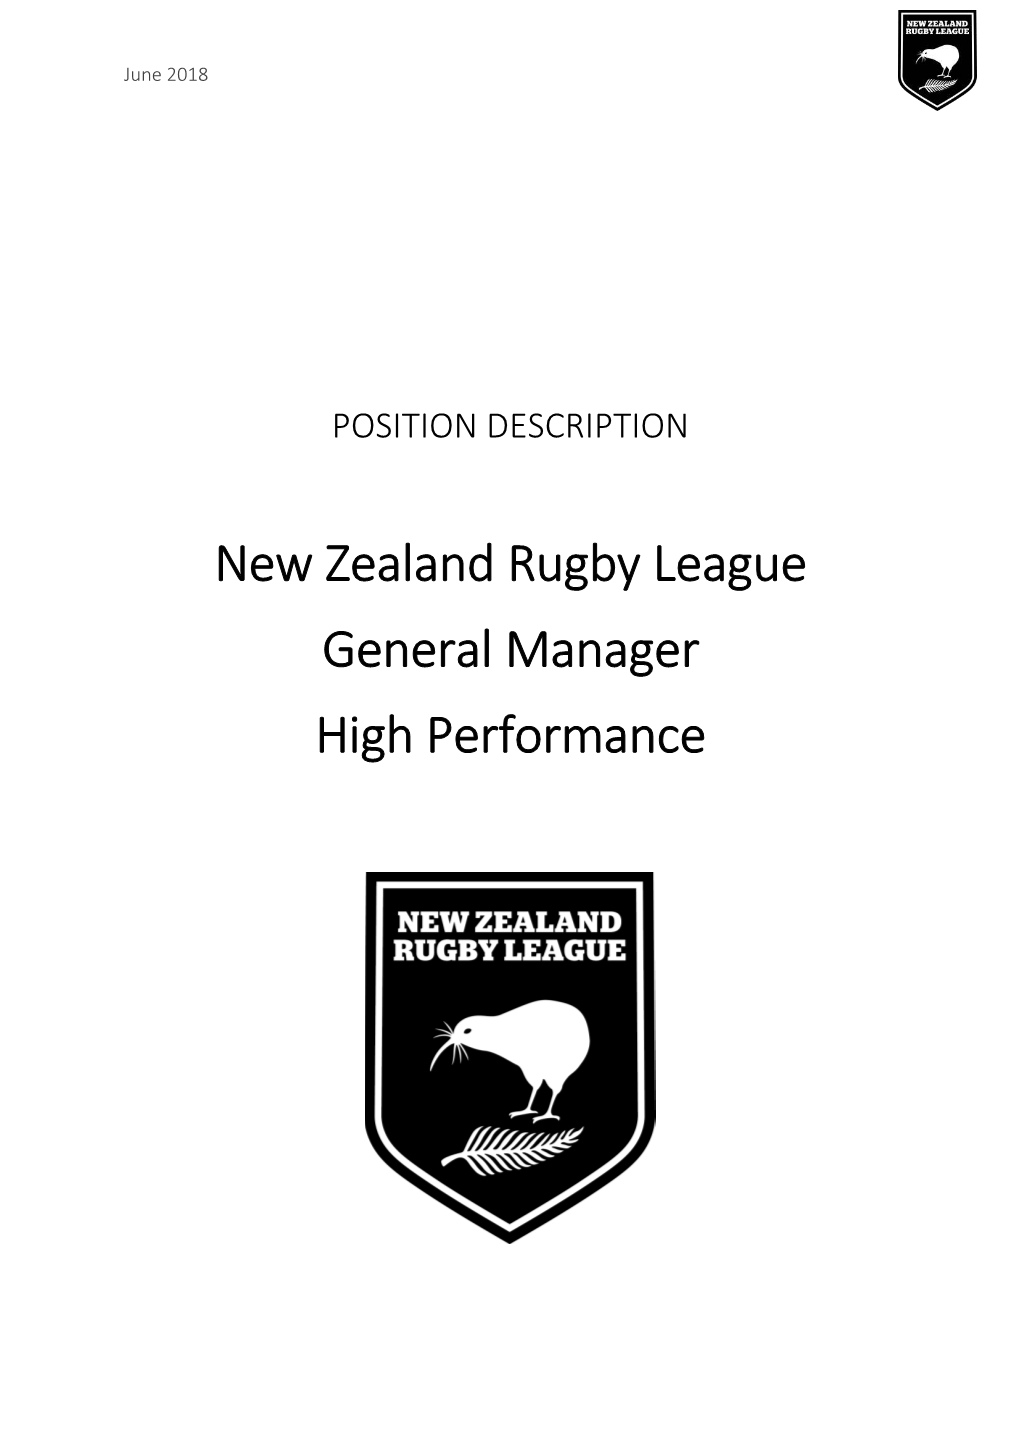 New Zealand Rugby League General Manager High Performance